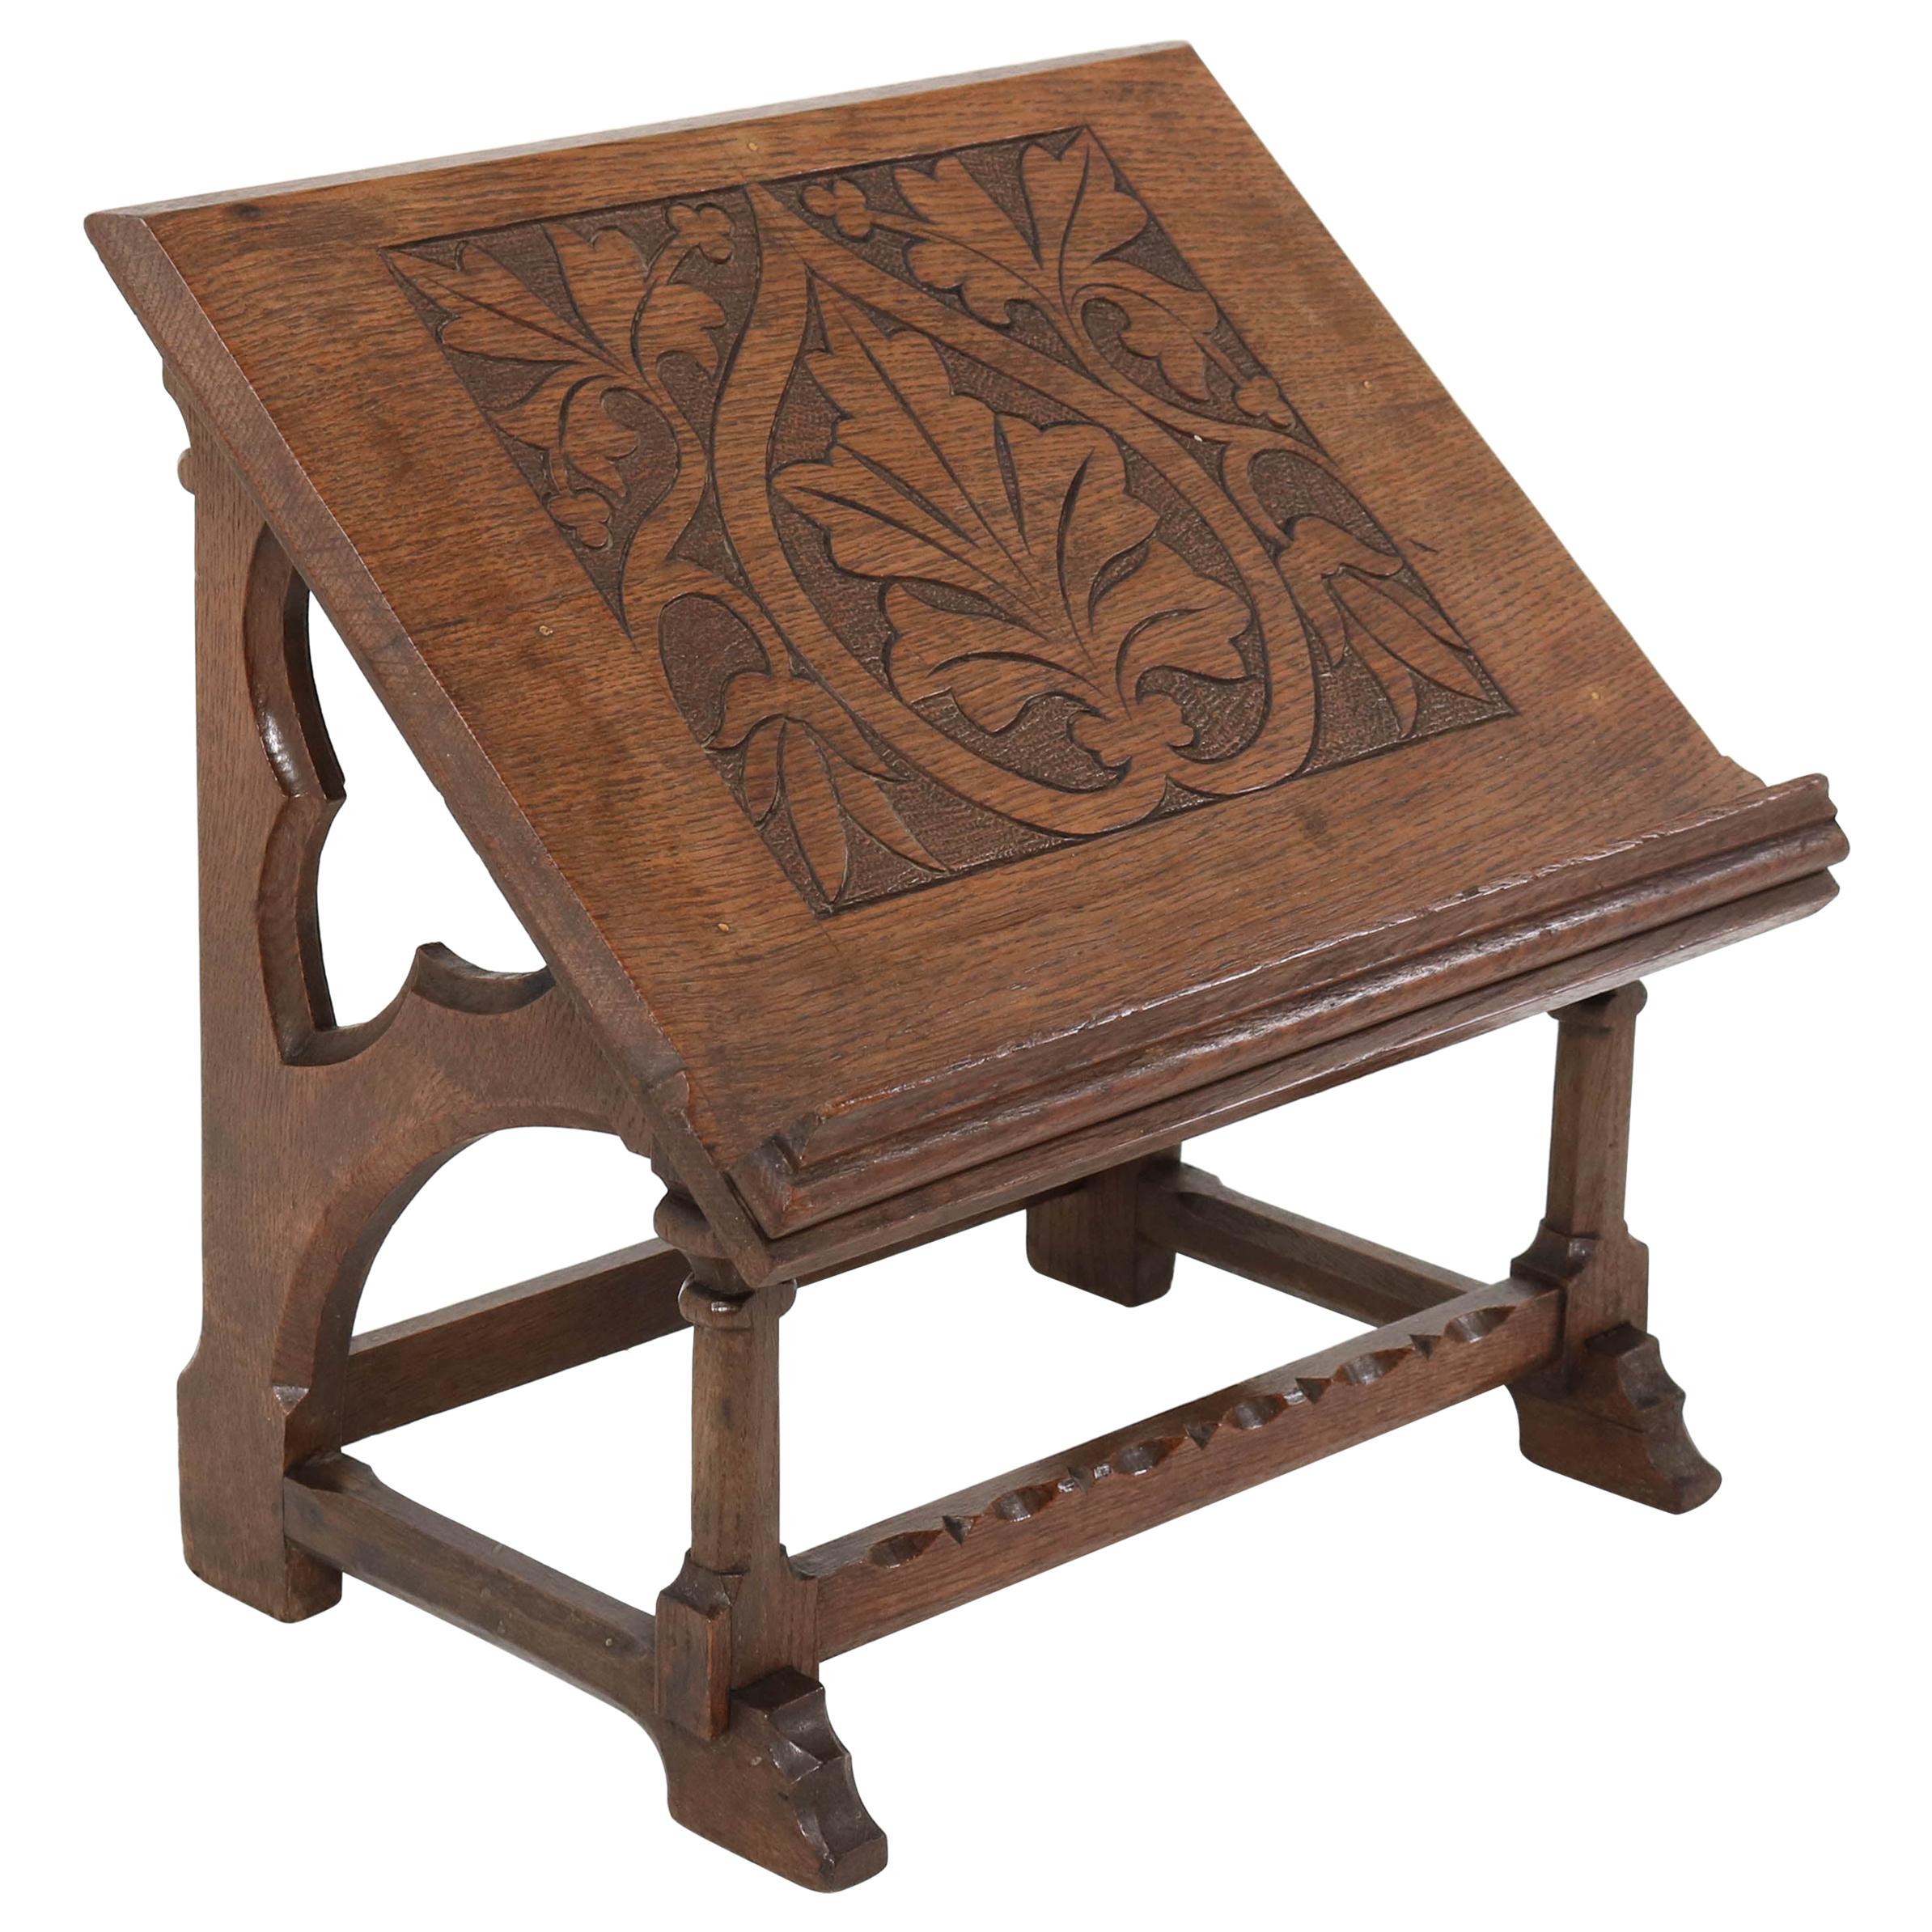 Oak Gothic Revival Lectern or Book Stand, 1900s